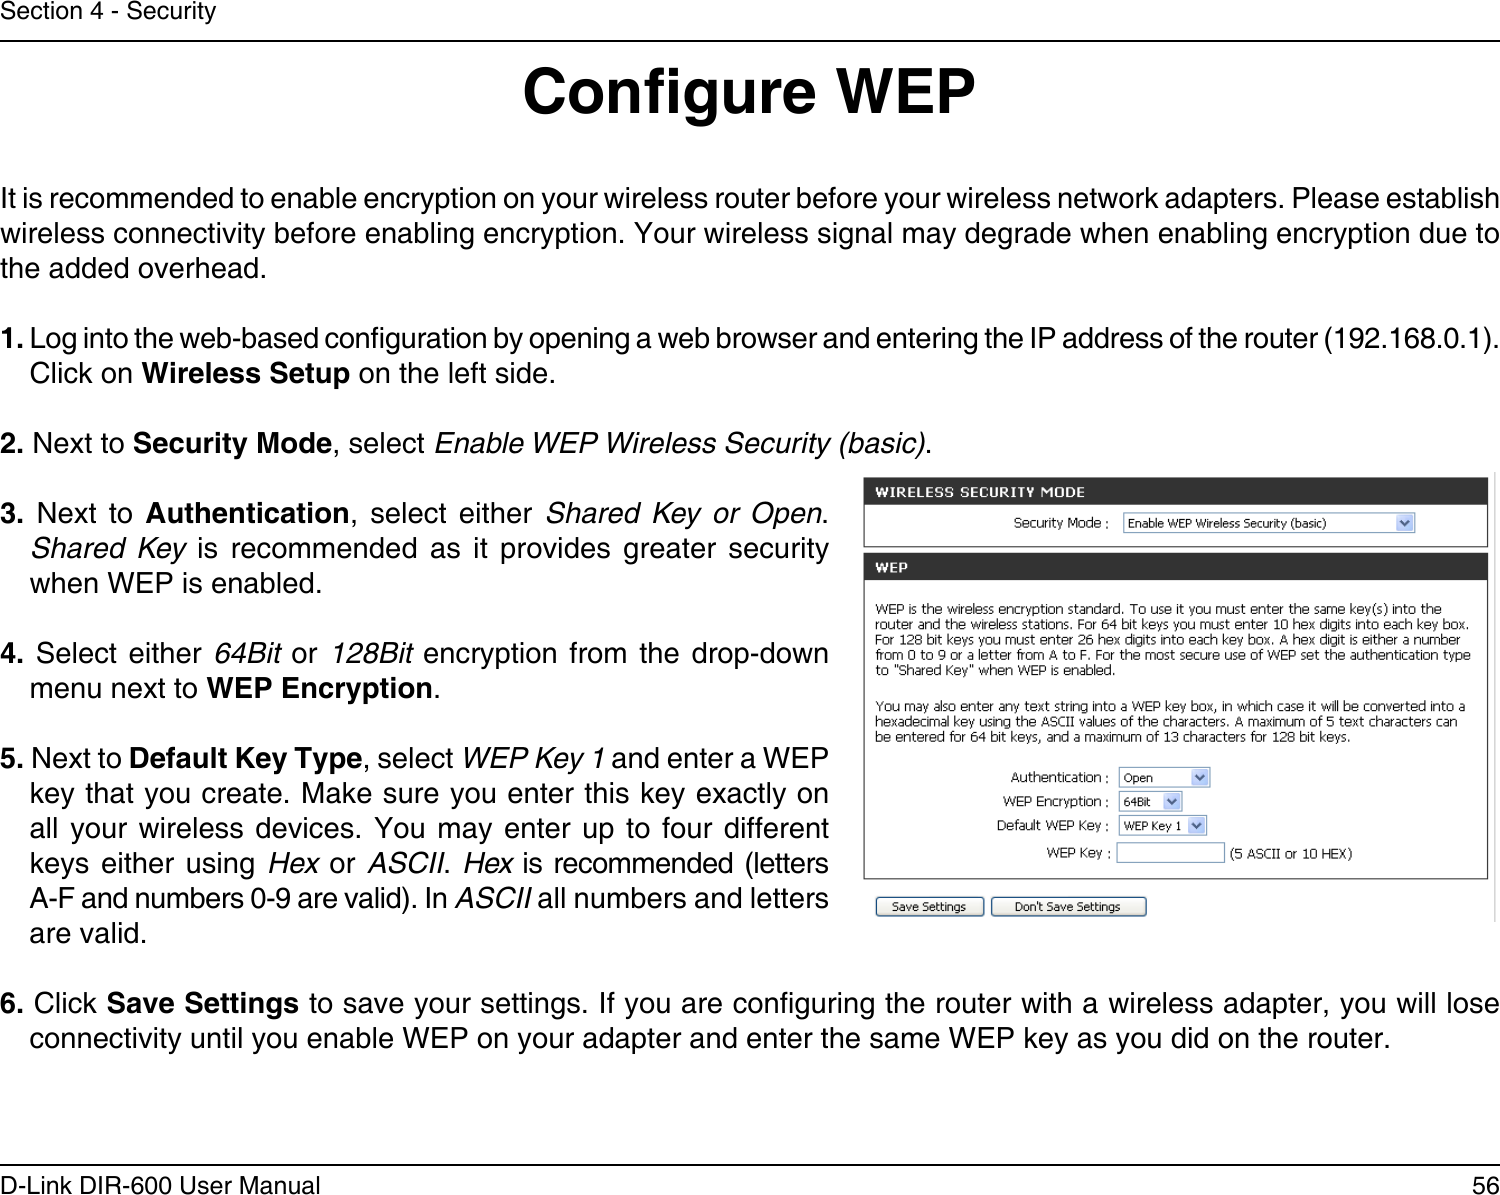 56D-Link DIR-600 User ManualSection 4 - SecurityCongure WEPIt is recommended to enable encryption on your wireless router before your wireless network adapters. Please establish wireless connectivity before enabling encryption. Your wireless signal may degrade when enabling encryption due to the added overhead.1. Log into the web-based conguration by opening a web browser and entering the IP address of the router (192.168.0.1).  Click on Wireless Setup on the left side.2. Next to Security Mode, select Enable WEP Wireless Security (basic).3.  Next  to  Authentication,  select  either  Shared  Key  or  Open. Shared  Key  is  recommended  as  it  provides  greater  security when WEP is enabled.4.  Select  either  64Bit  or  128Bit  encryption  from  the  drop-down menu next to WEP Encryption. 5. Next to Default Key Type, select WEP Key 1 and enter a WEP key that you create. Make sure you enter this key exactly on all your wireless devices. You may enter  up  to  four  different keys either using Hex  or  ASCII. Hex is recommended (letters A-F and numbers 0-9 are valid). In ASCII all numbers and letters are valid.6. Click Save Settings to save your settings. If you are conguring the router with a wireless adapter, you will lose connectivity until you enable WEP on your adapter and enter the same WEP key as you did on the router.